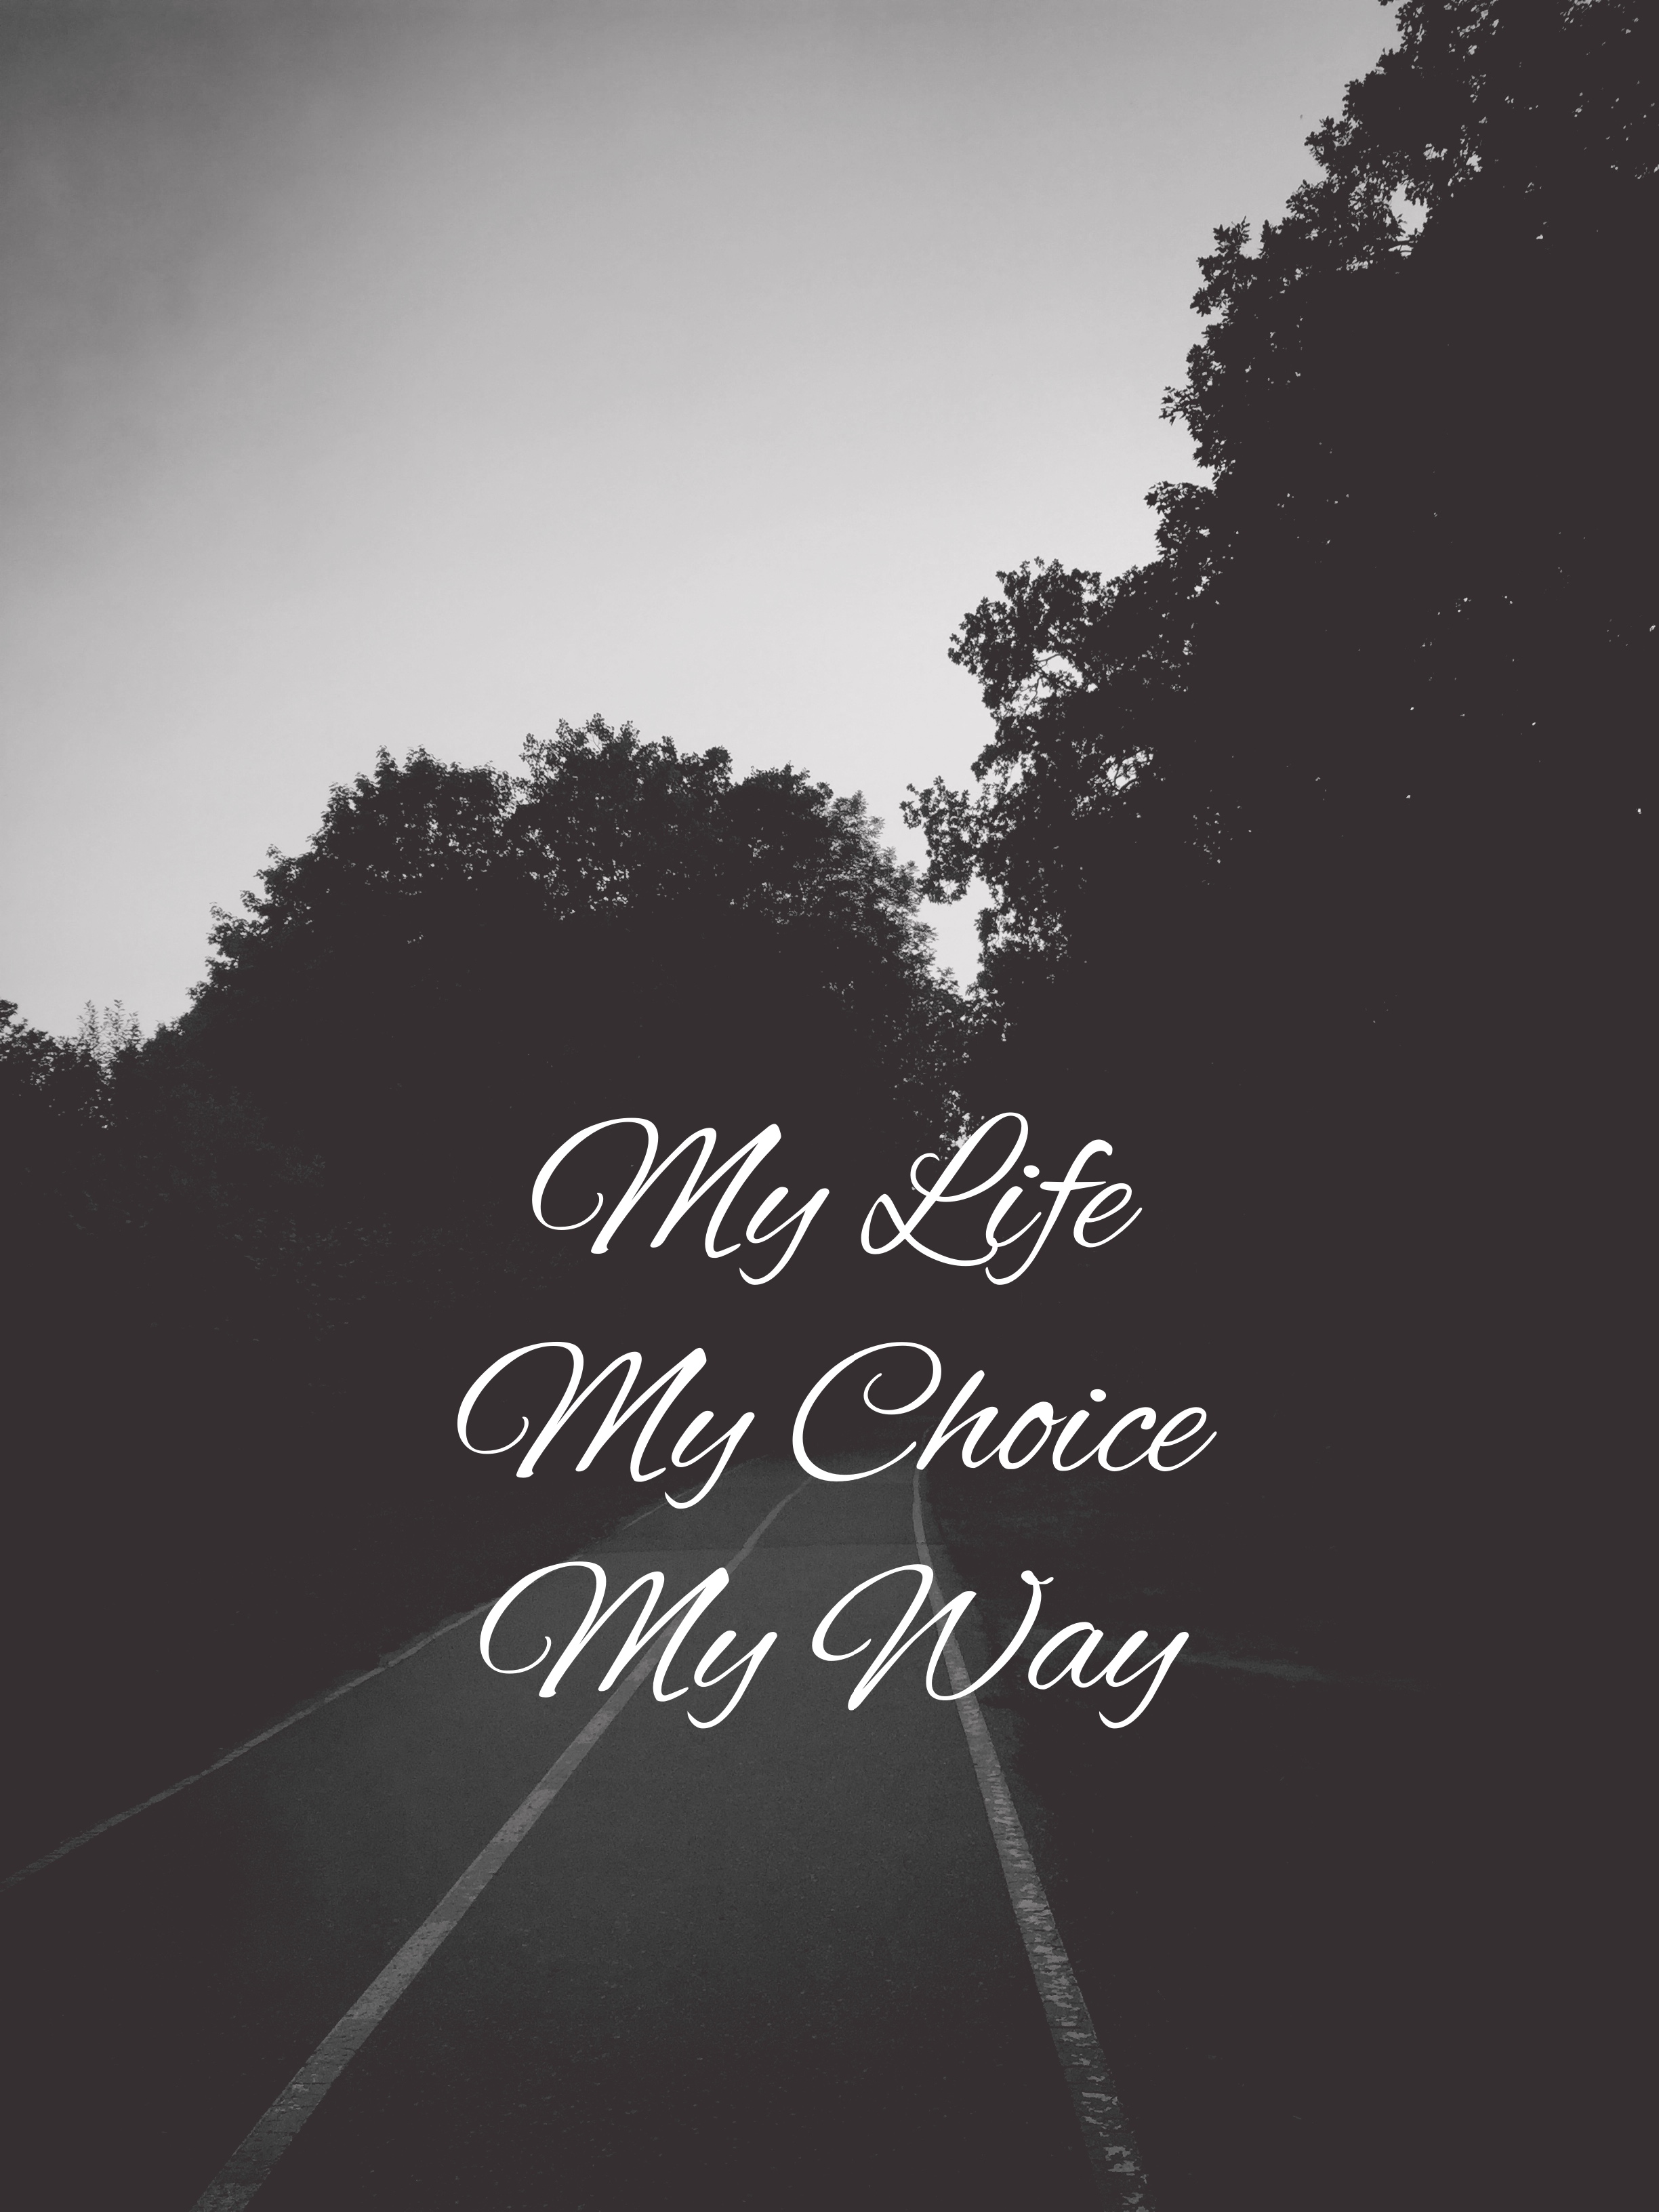 text, bw, quotation, quote, chb, words, inscription, road, path, way